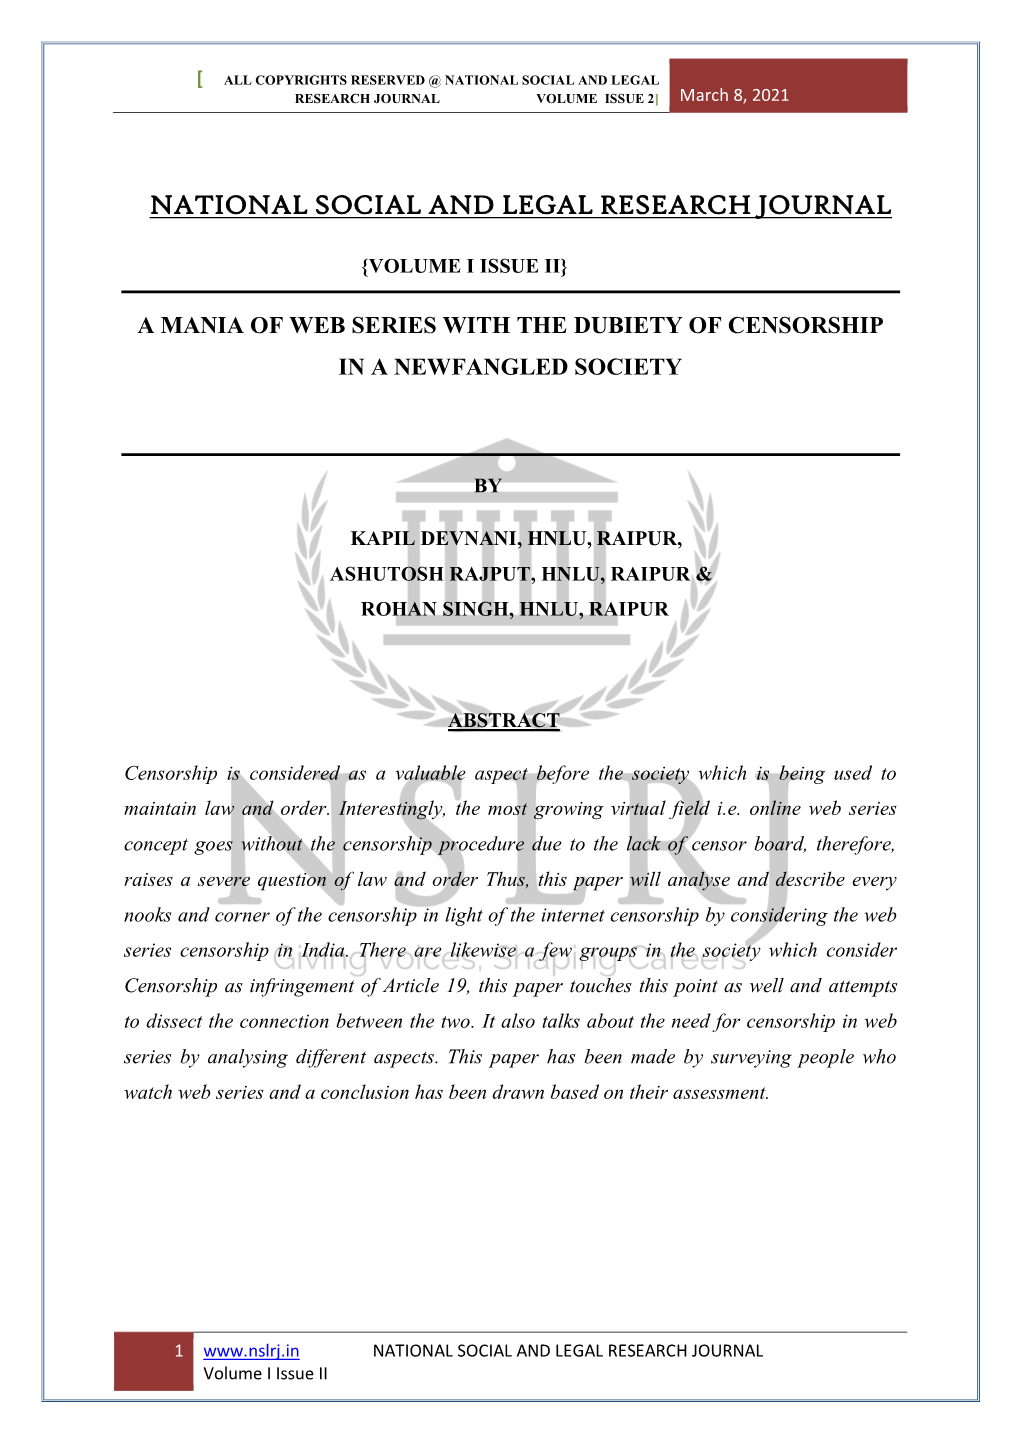 ALL COPYRIGHTS RESERVED @ NATIONAL SOCIAL and LEGAL RESEARCH JOURNAL VOLUME ISSUE 2] March 8, 2021